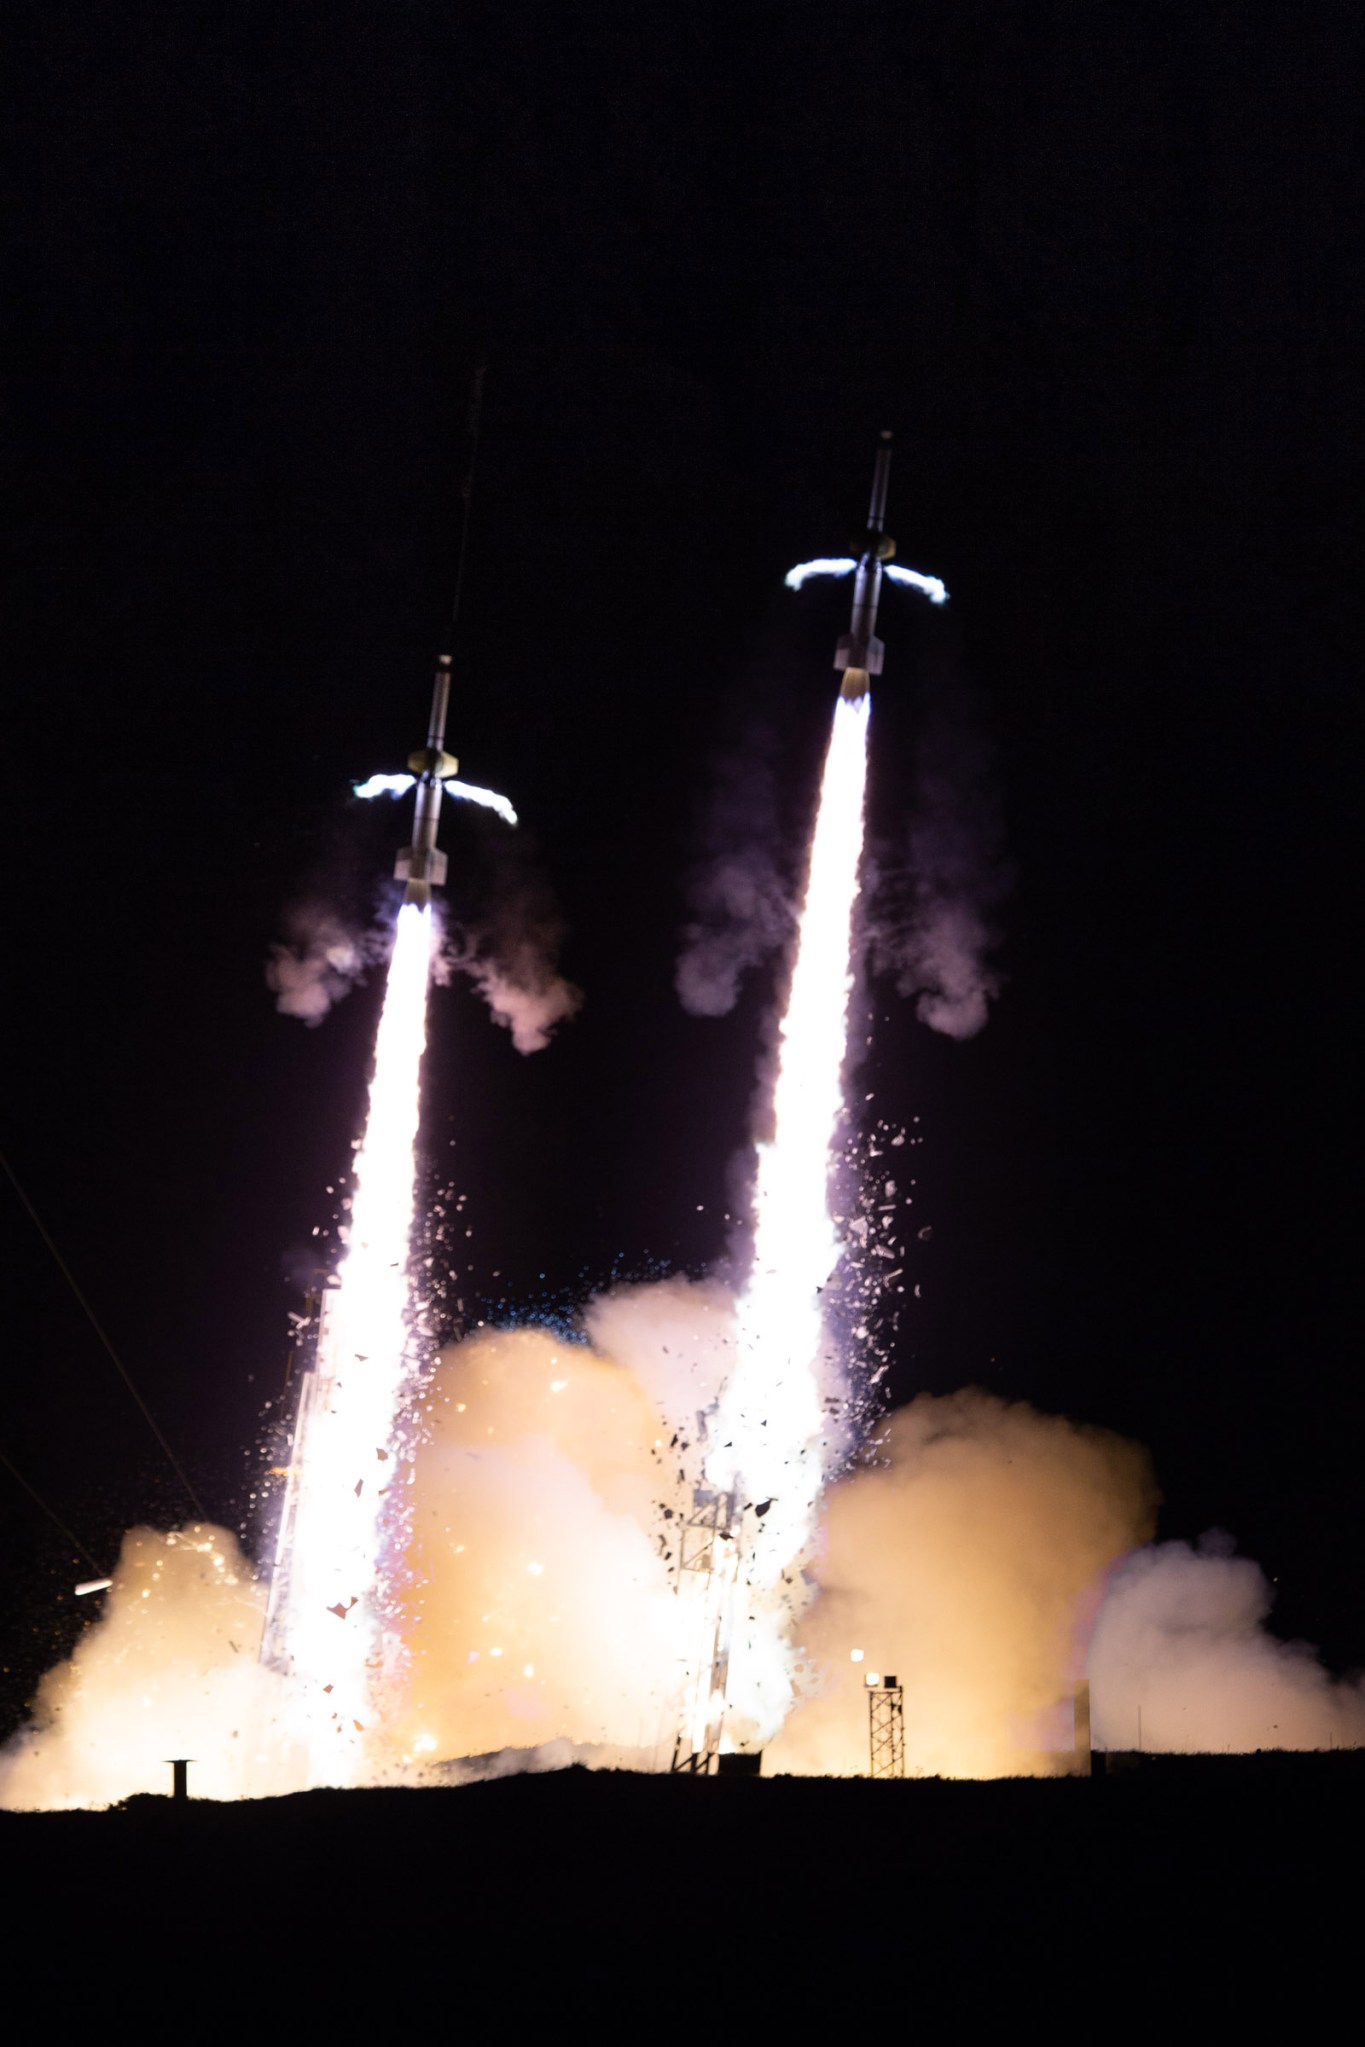 A composite image of two rockets that launched separately put together into one image. The background is black and the two rockets are each in mid-launch, with a white plume of smoke underneath each. Each have a little flame on either side in the middle of the rocket, representing the spin motors firing.